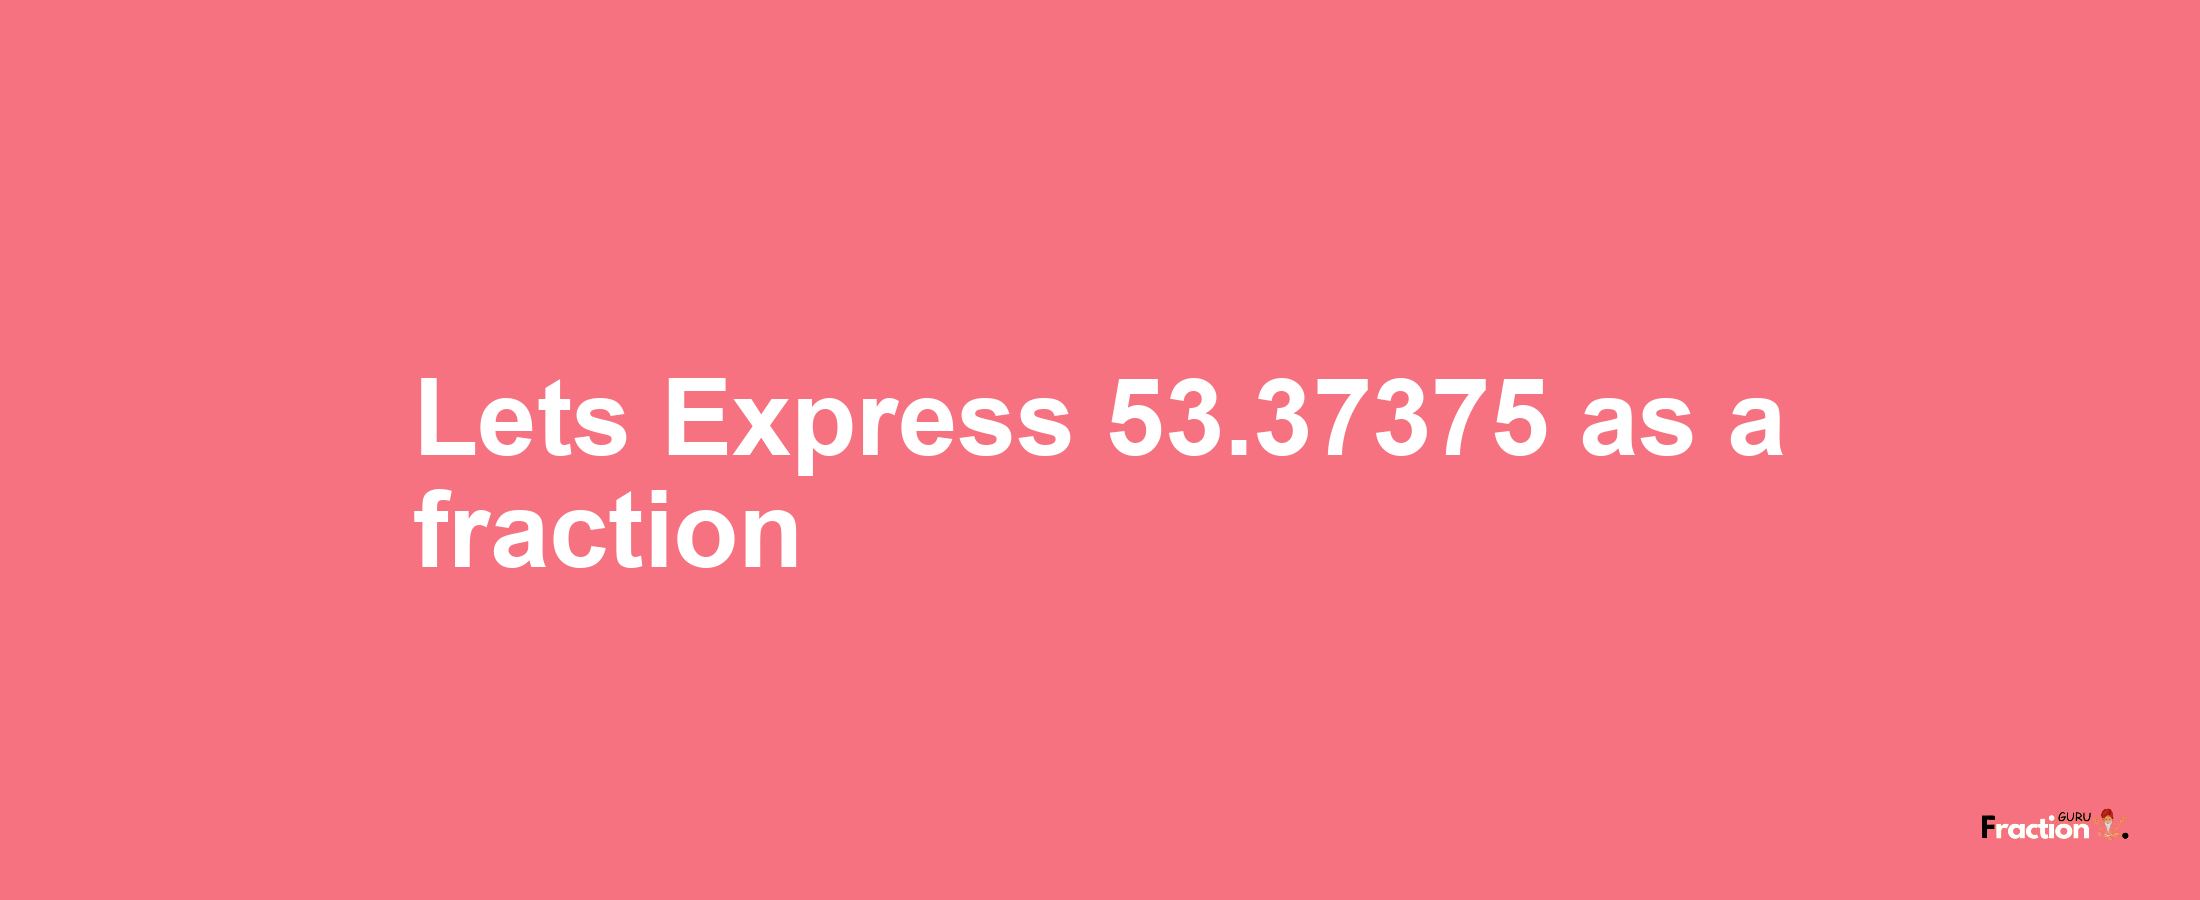 Lets Express 53.37375 as afraction